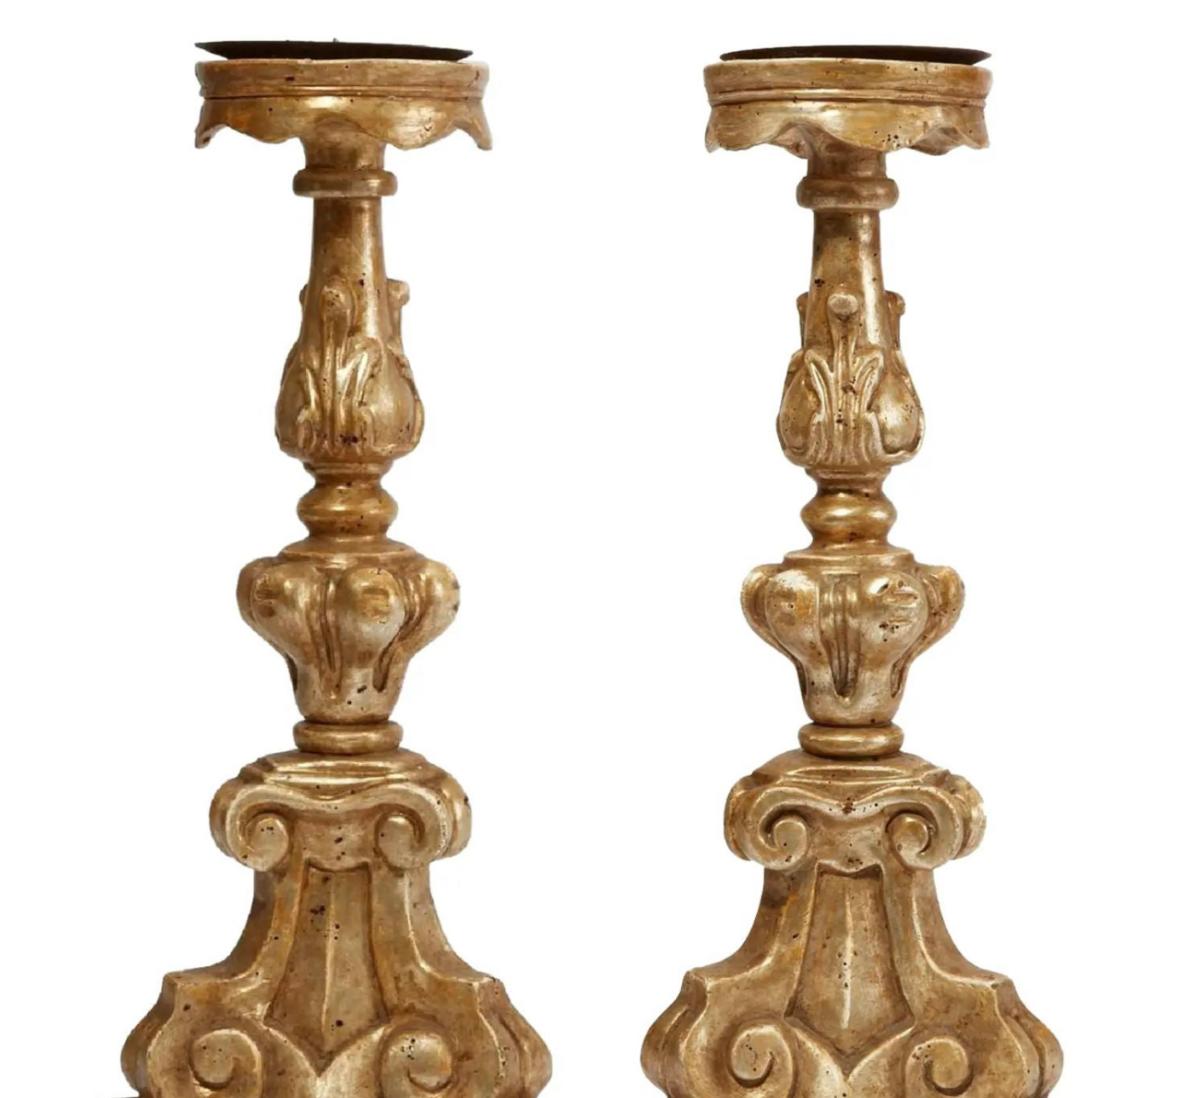 Hand-Carved Pair of 18th Century Style Thomas Morgan Italian Giltwood Pricket Candlesticks For Sale